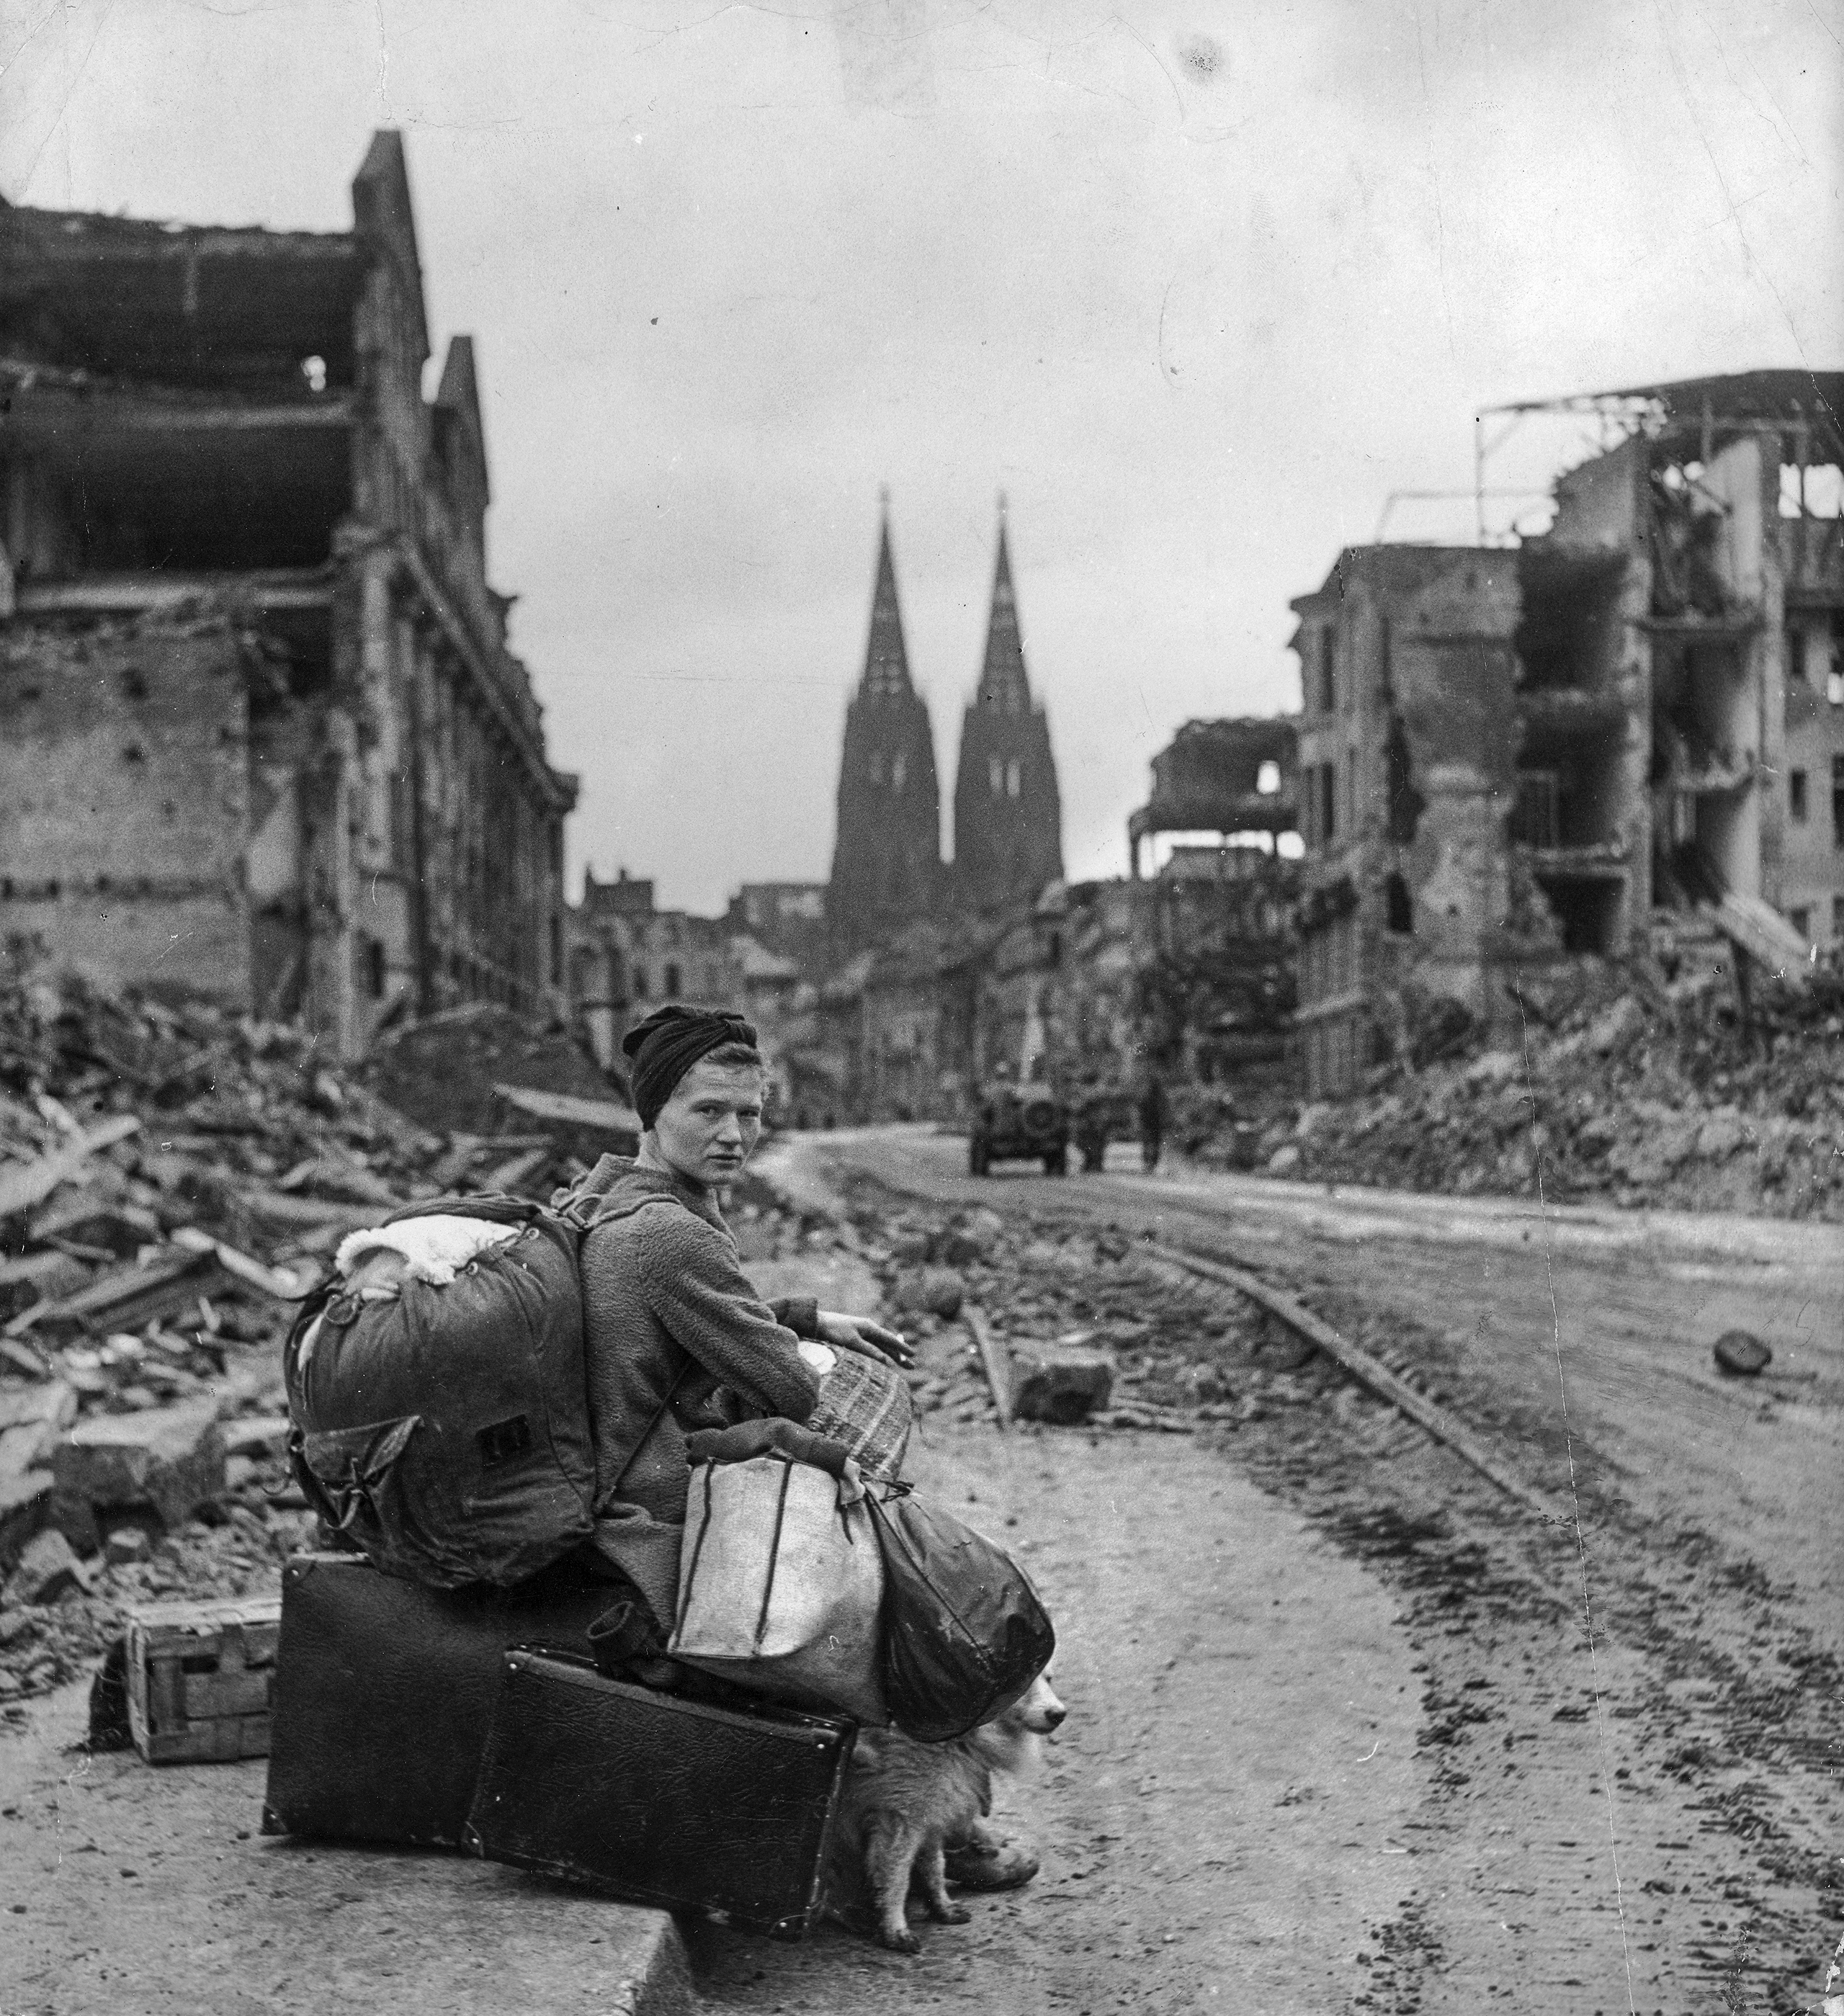 A homeless refugee German woman sits with all of her possessions on the side of a muddy street in Cologne amid ruins caused by massive Allied air raids, March 1945.